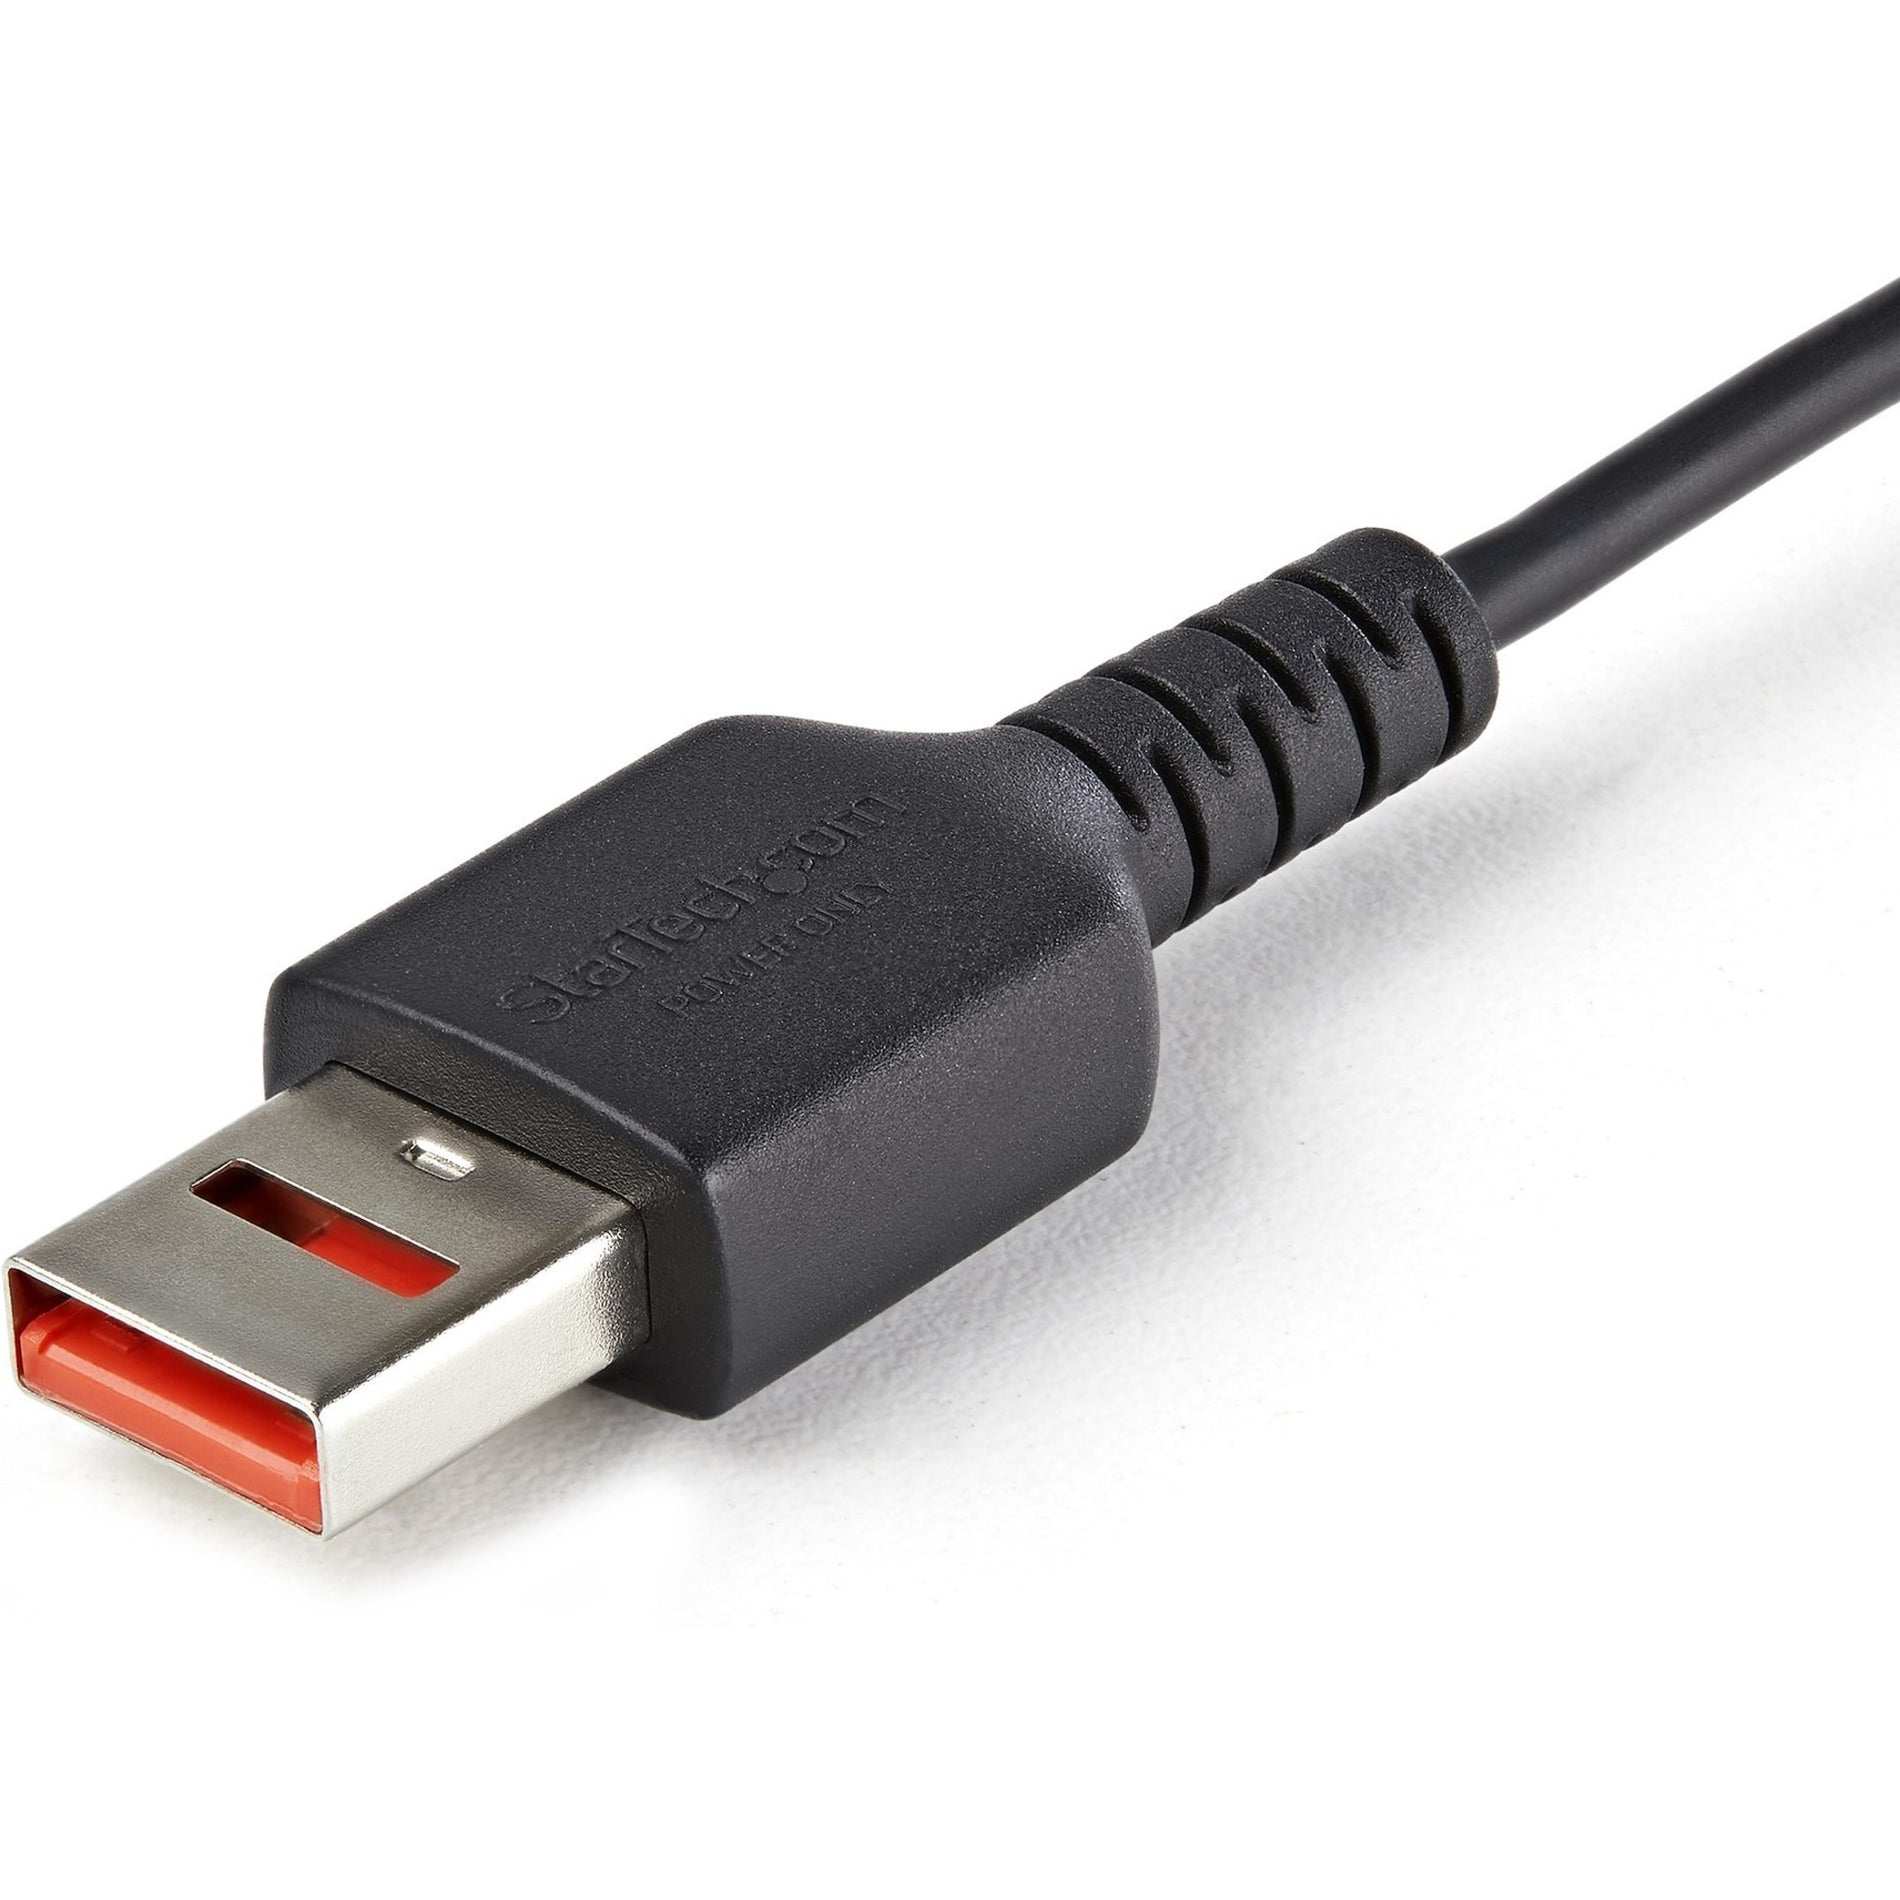 StarTech.com USBSCHAC1M USB/USB-C Data Transfer Cable, 3ft (1m) Secure Charging Cable, Charge-Only Cable for Phone/Tablet